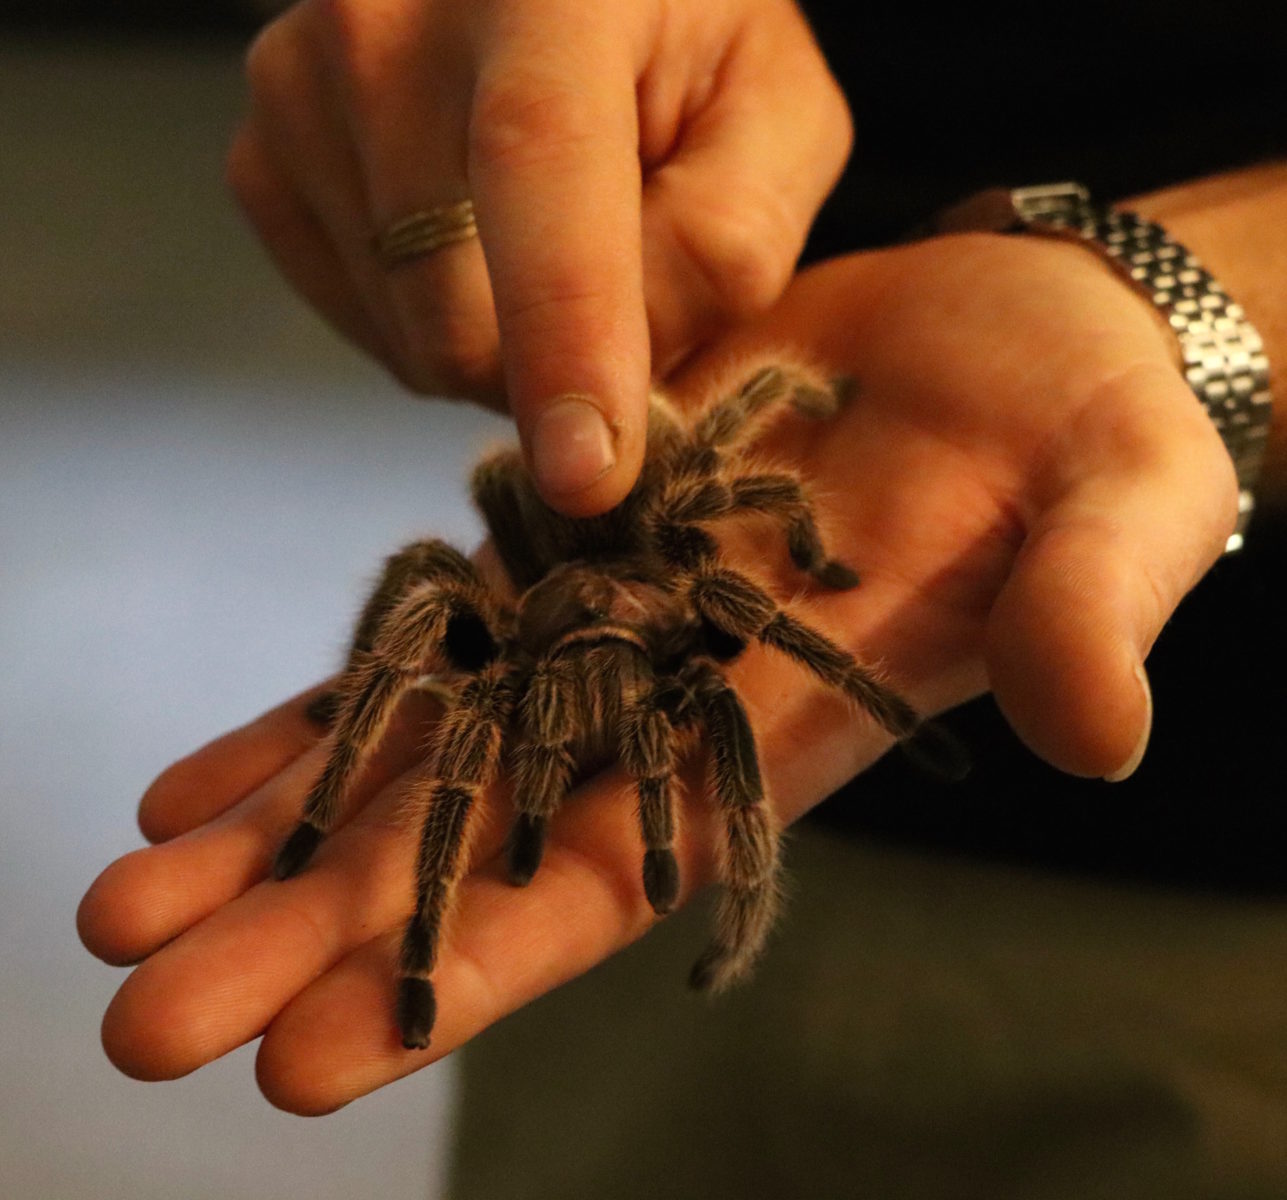 Photo of a Tarantula sitting in a person's hand.